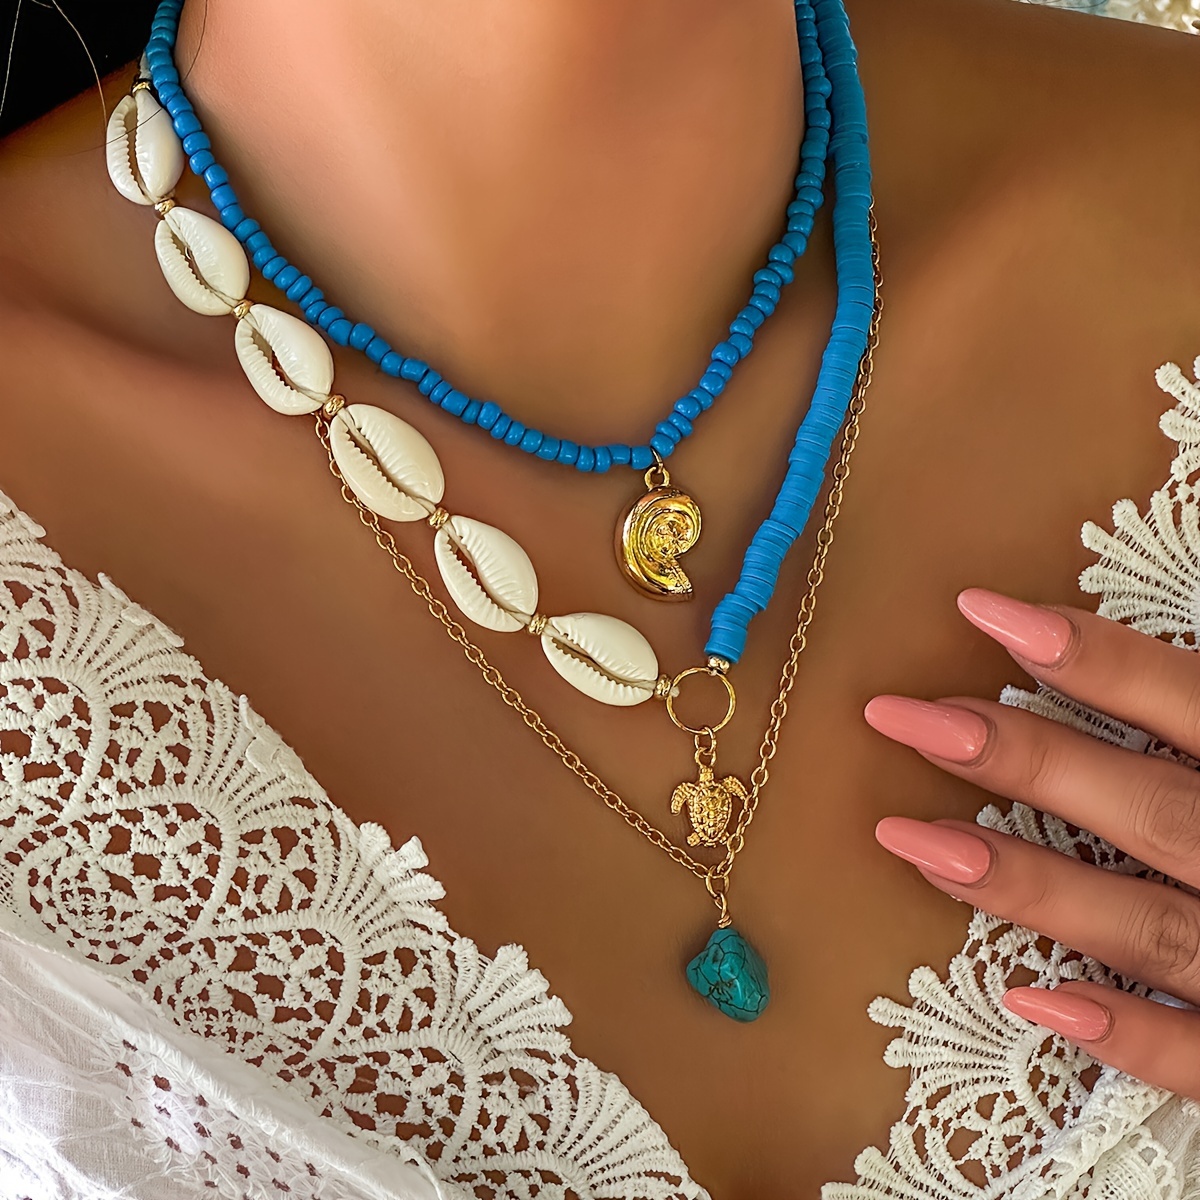 

Boho-chic 3-piece Ocean-inspired Turtle & Turquoise Pendant Necklace Set With Natural Shell Beads - Perfect For Everyday Wear Or Parties